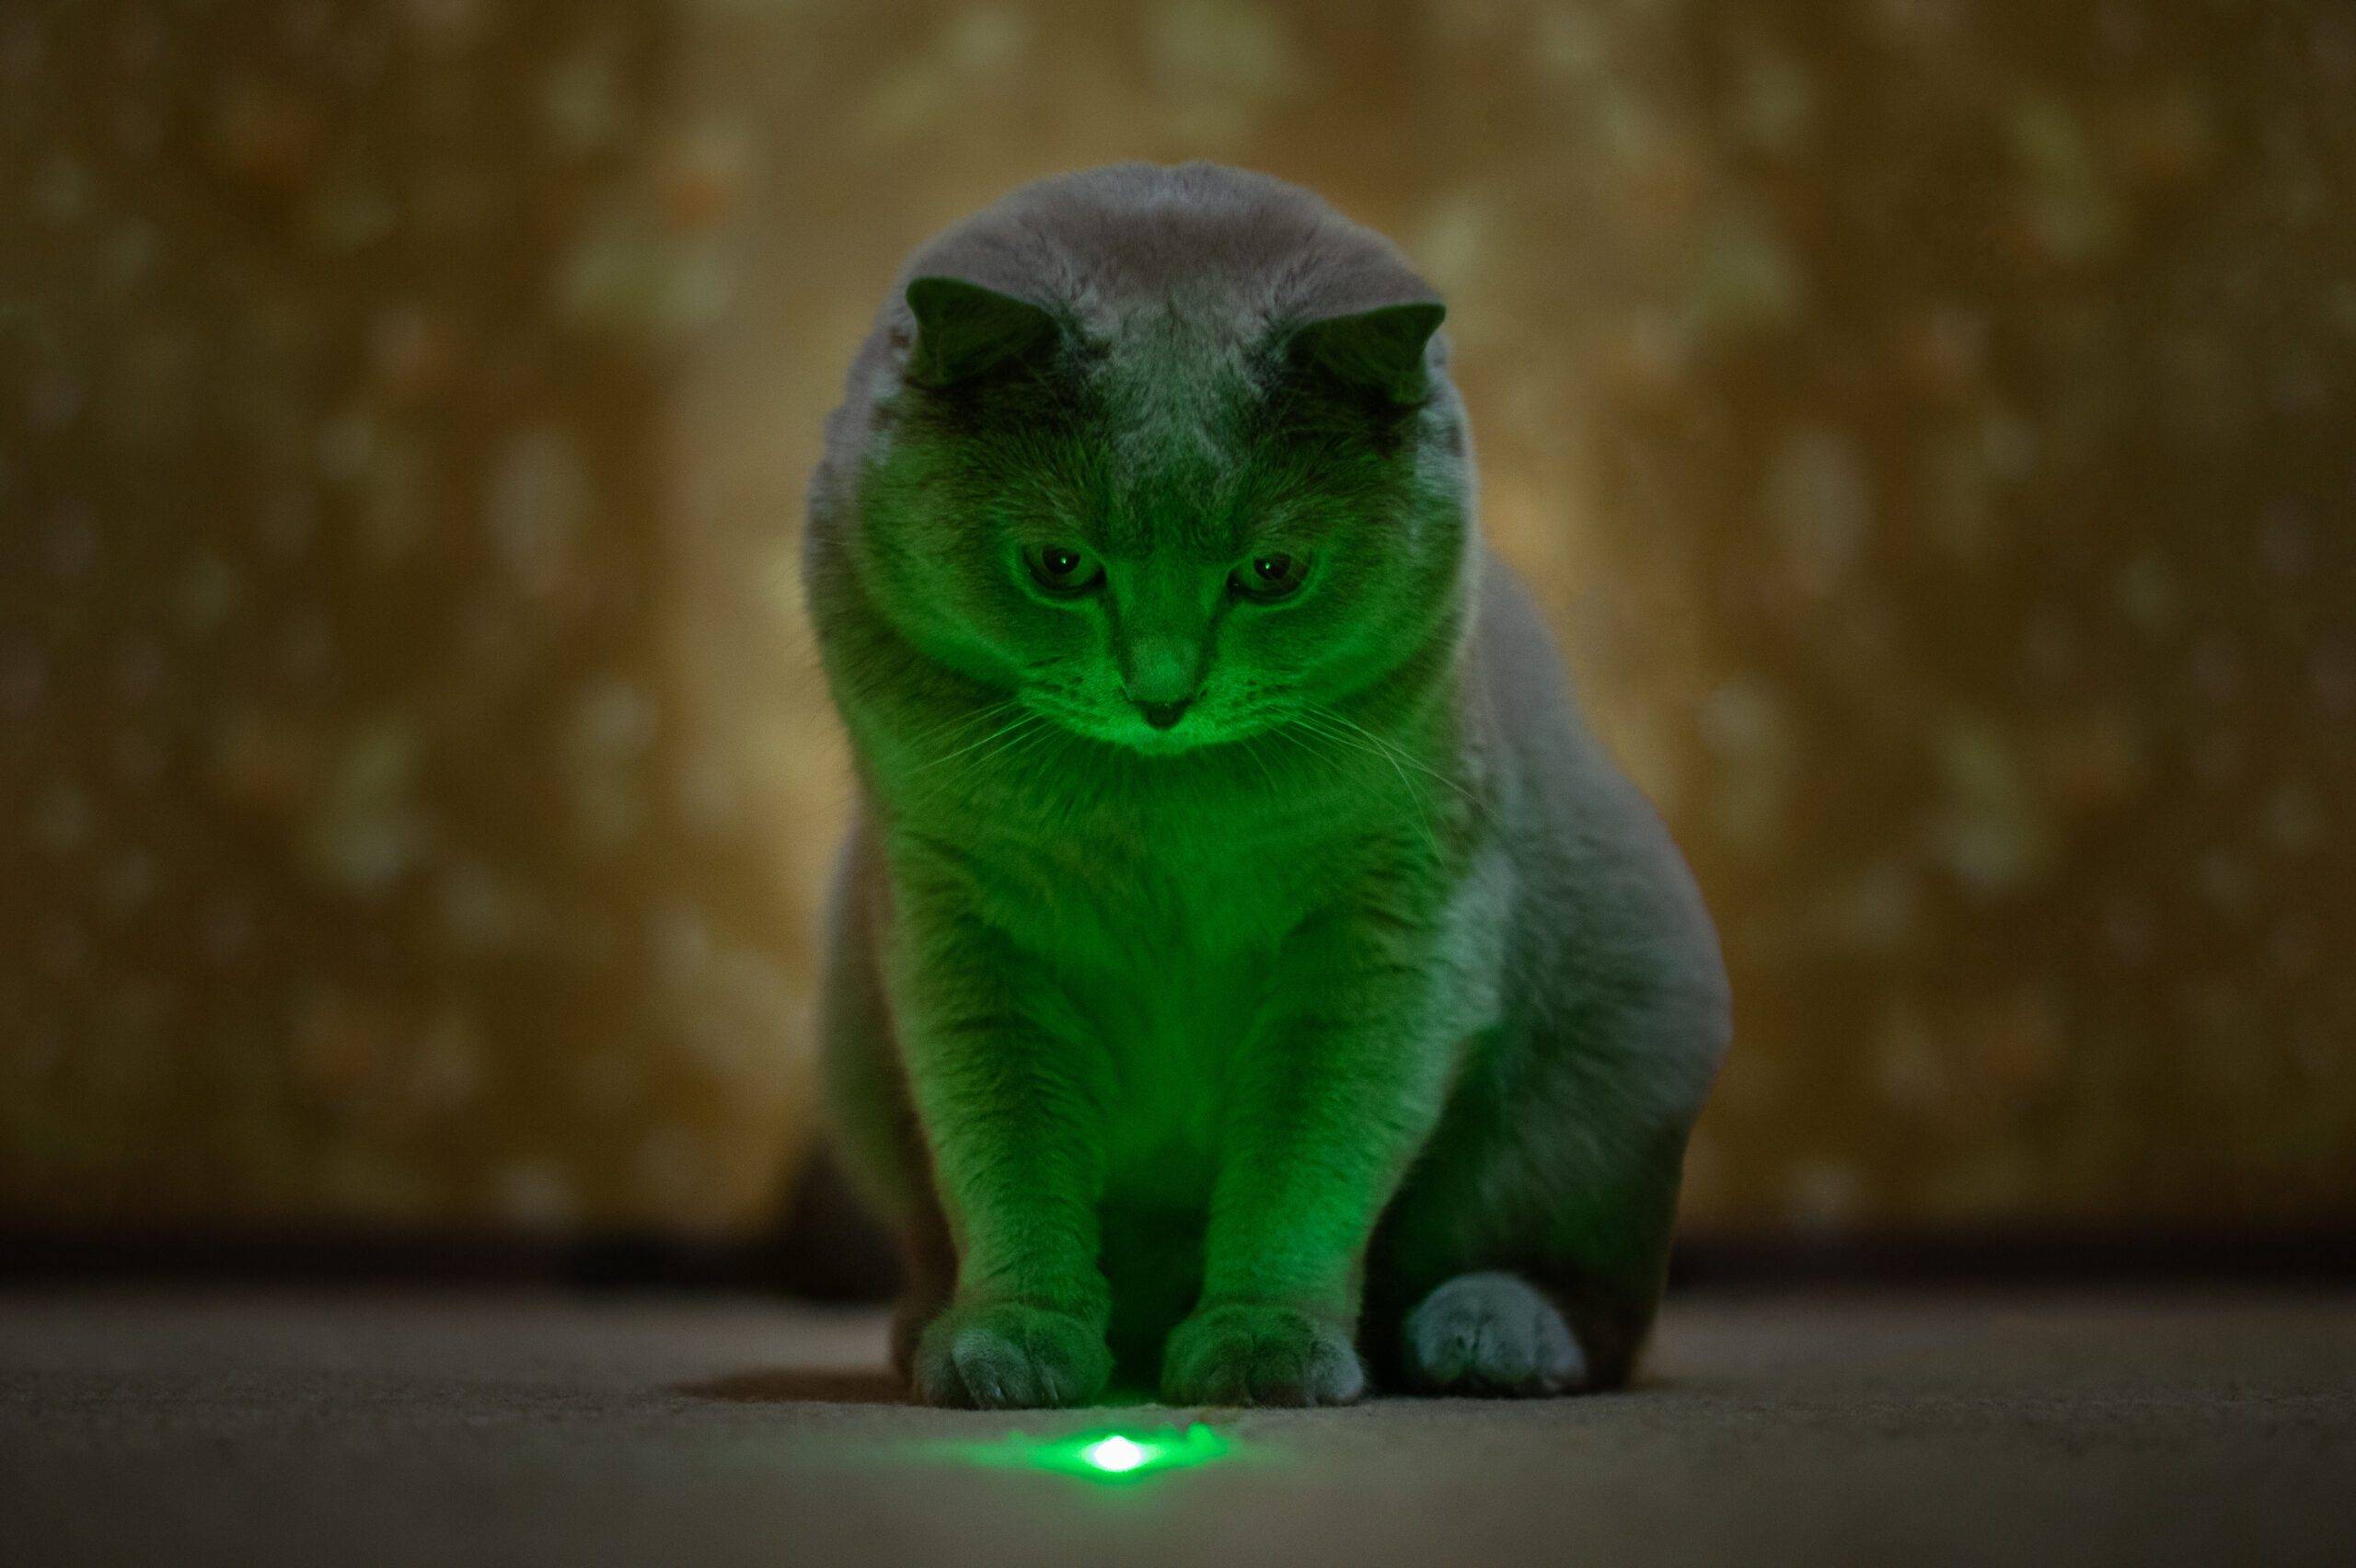 Like the green laser light illuminating this lilac cat, Alpec laser pointers are safe to use for pointing and are not a class 4 laser.